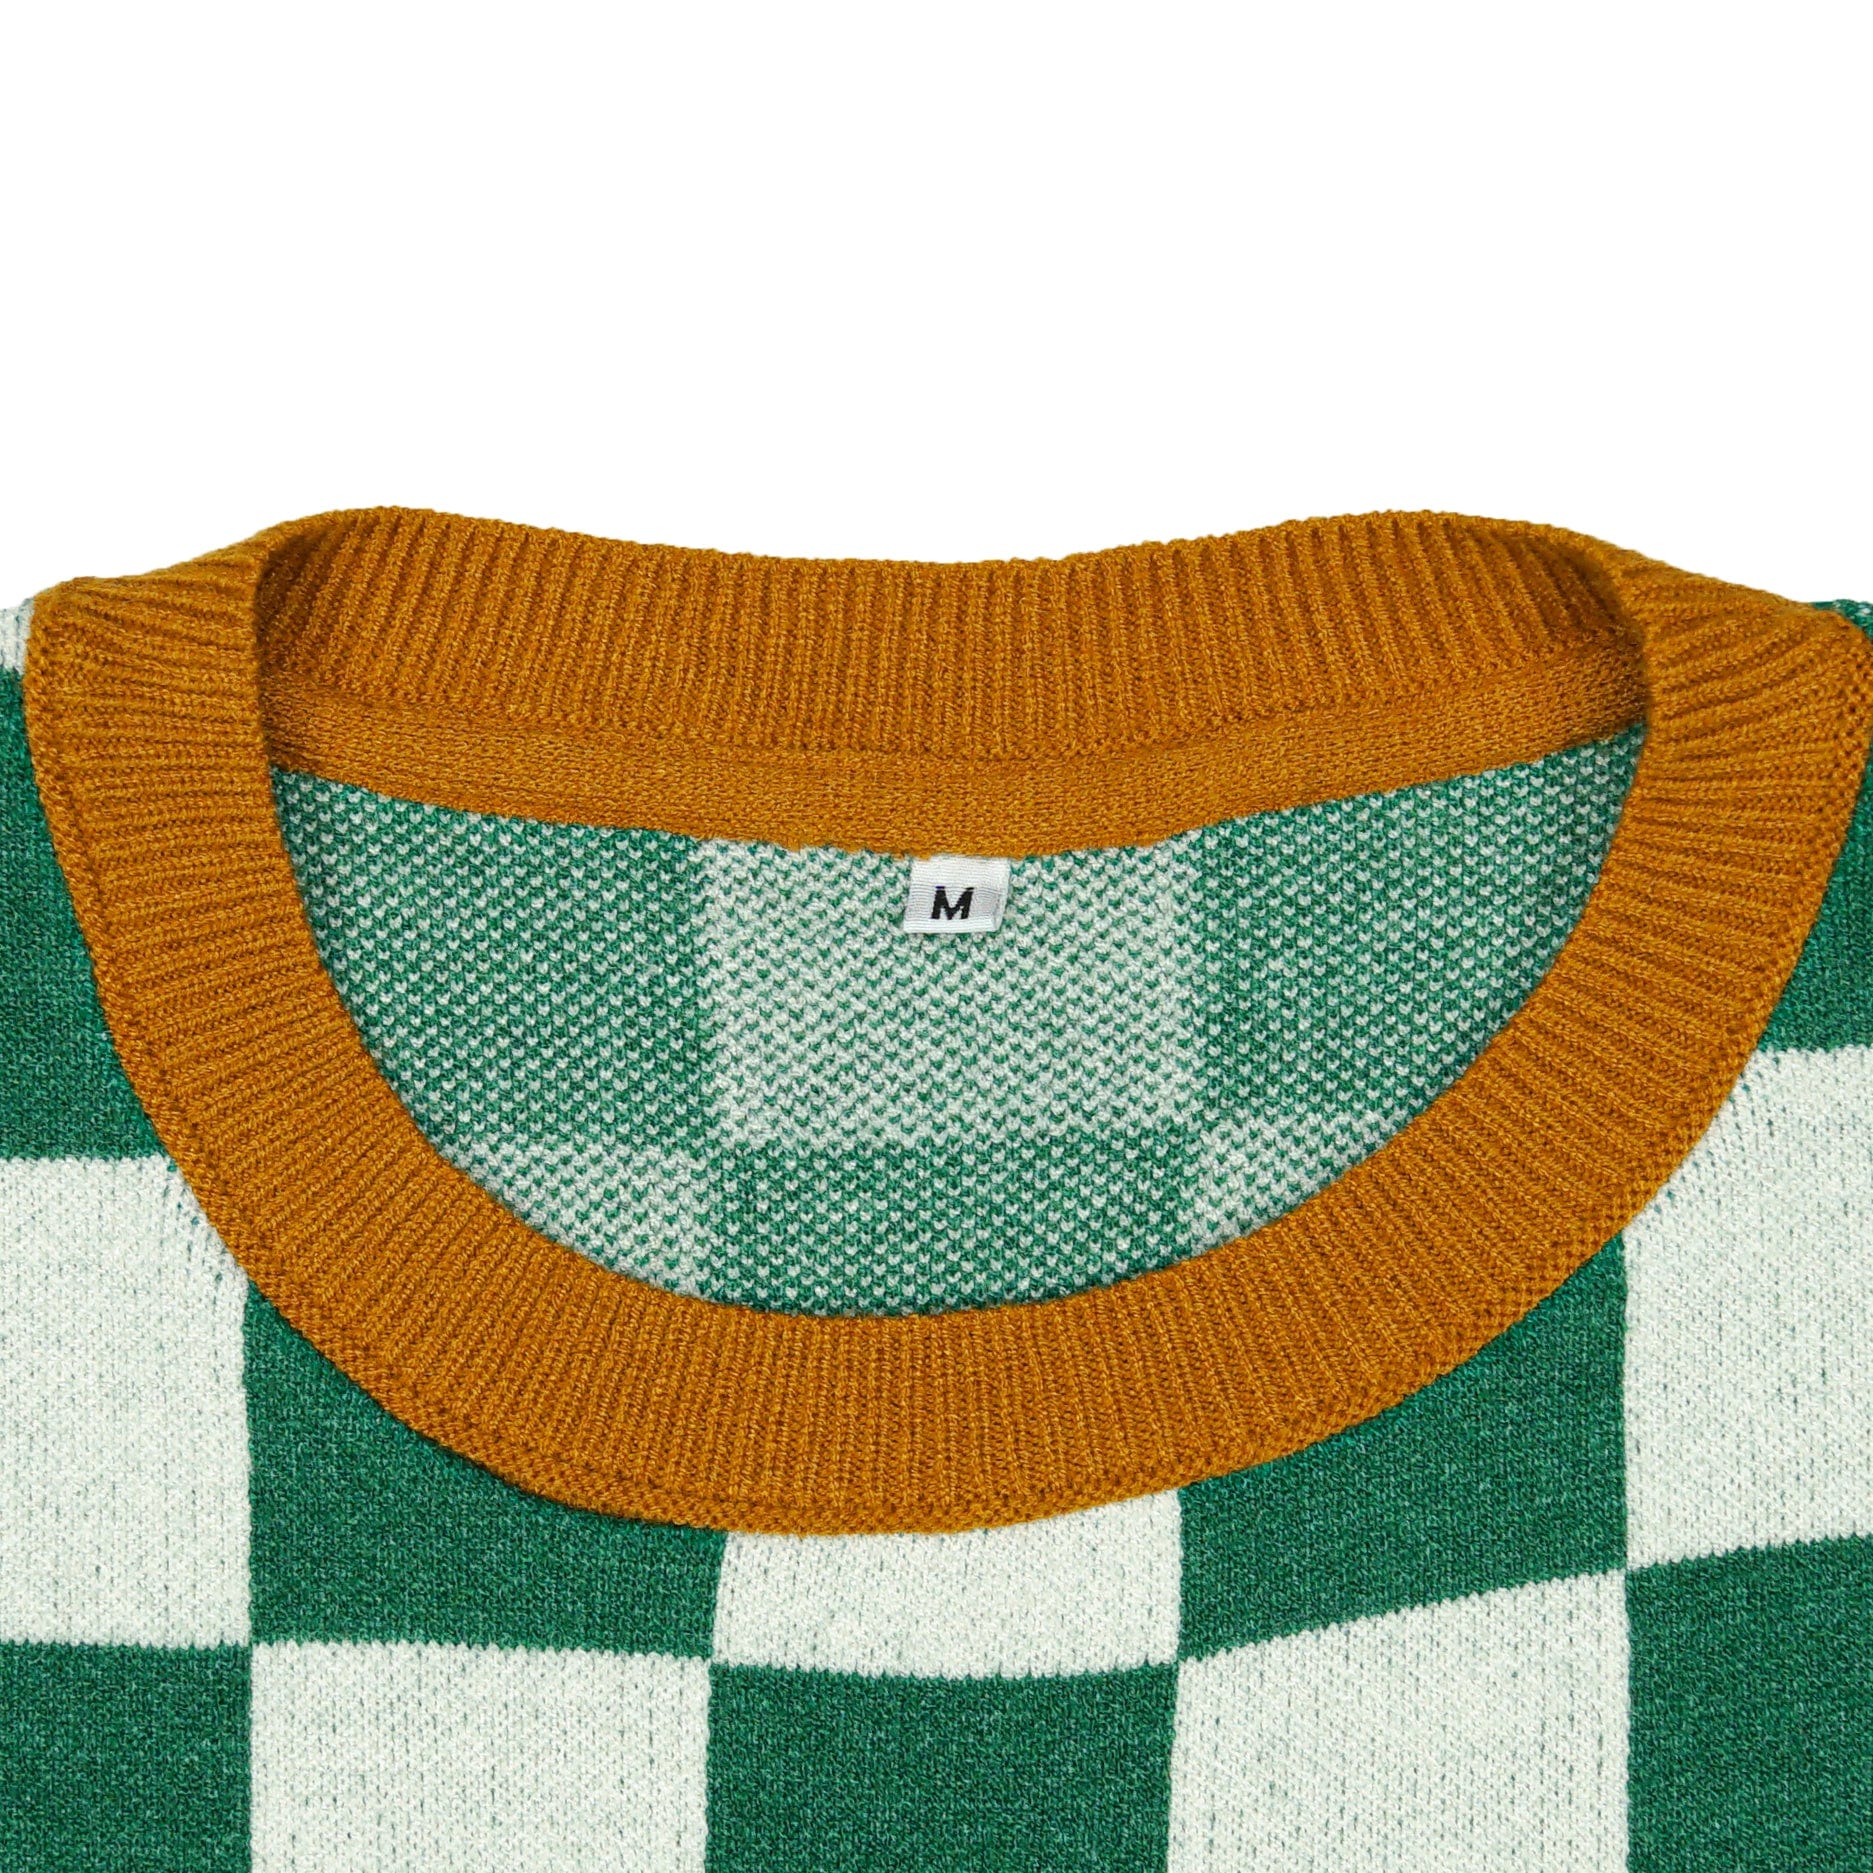 SOF Premium Checkerboard Knit Tee in green and white - State Of Flux - State Of Flux